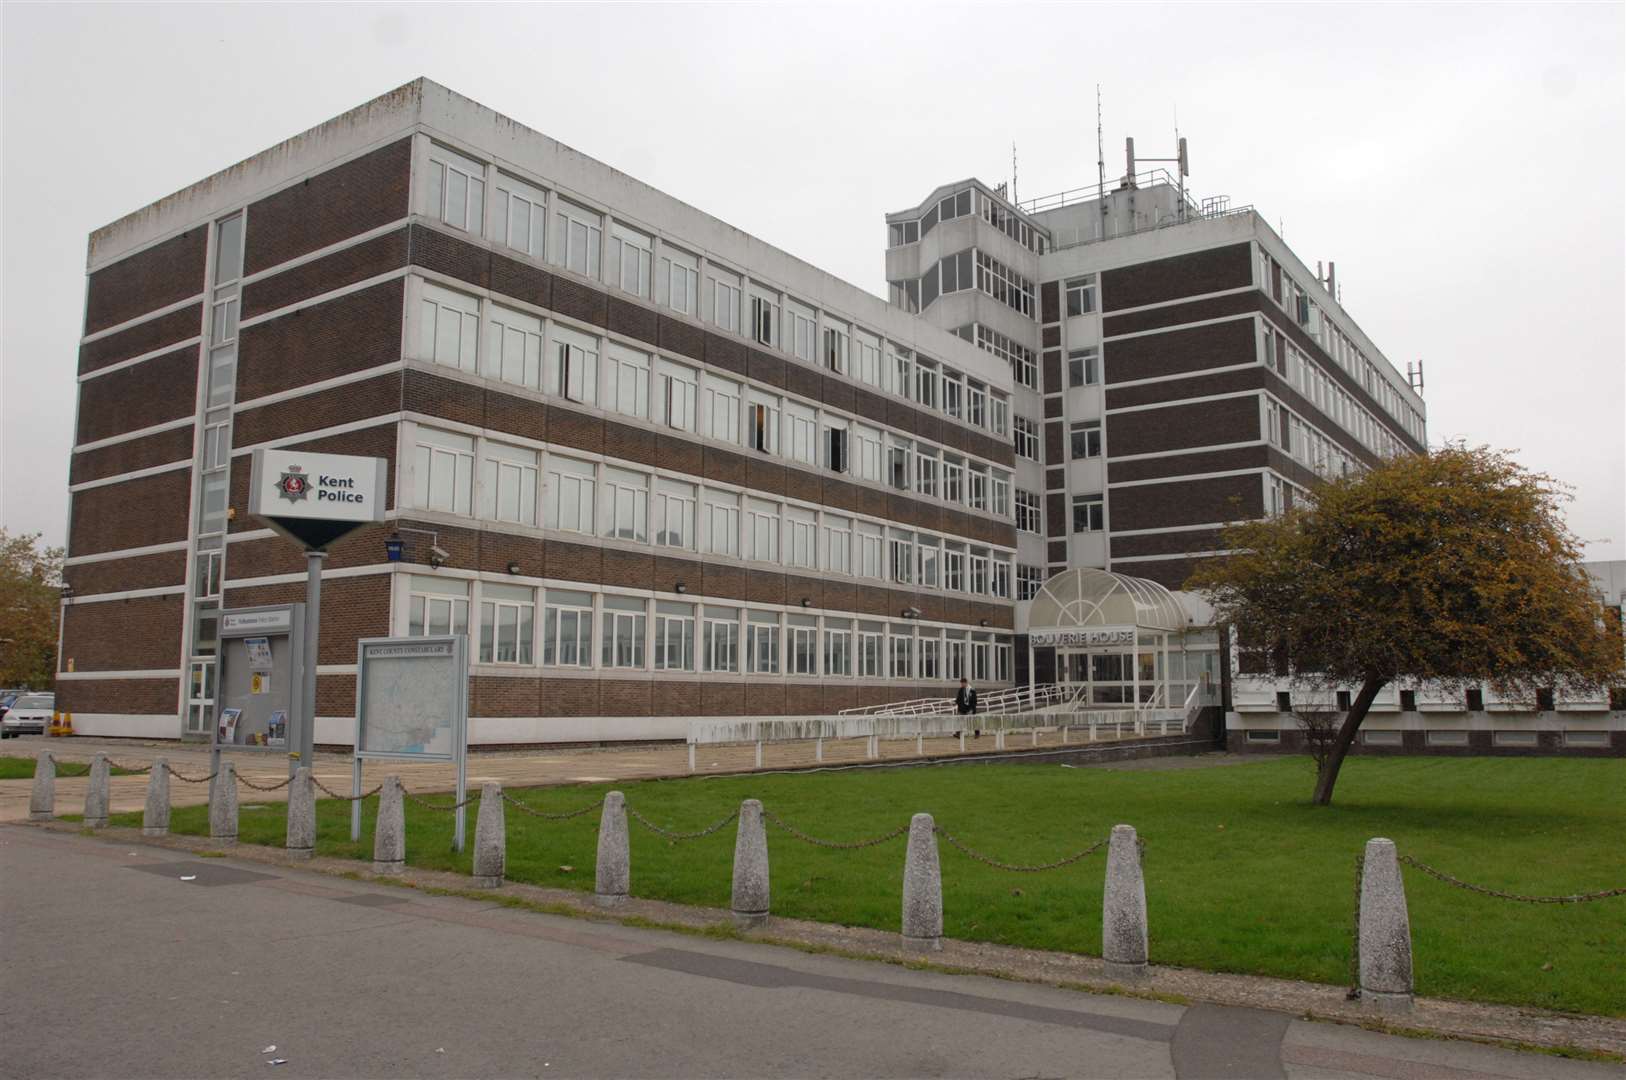 Stephen believed he caught the coronavirus during a work visit to the Folkestone Police Station